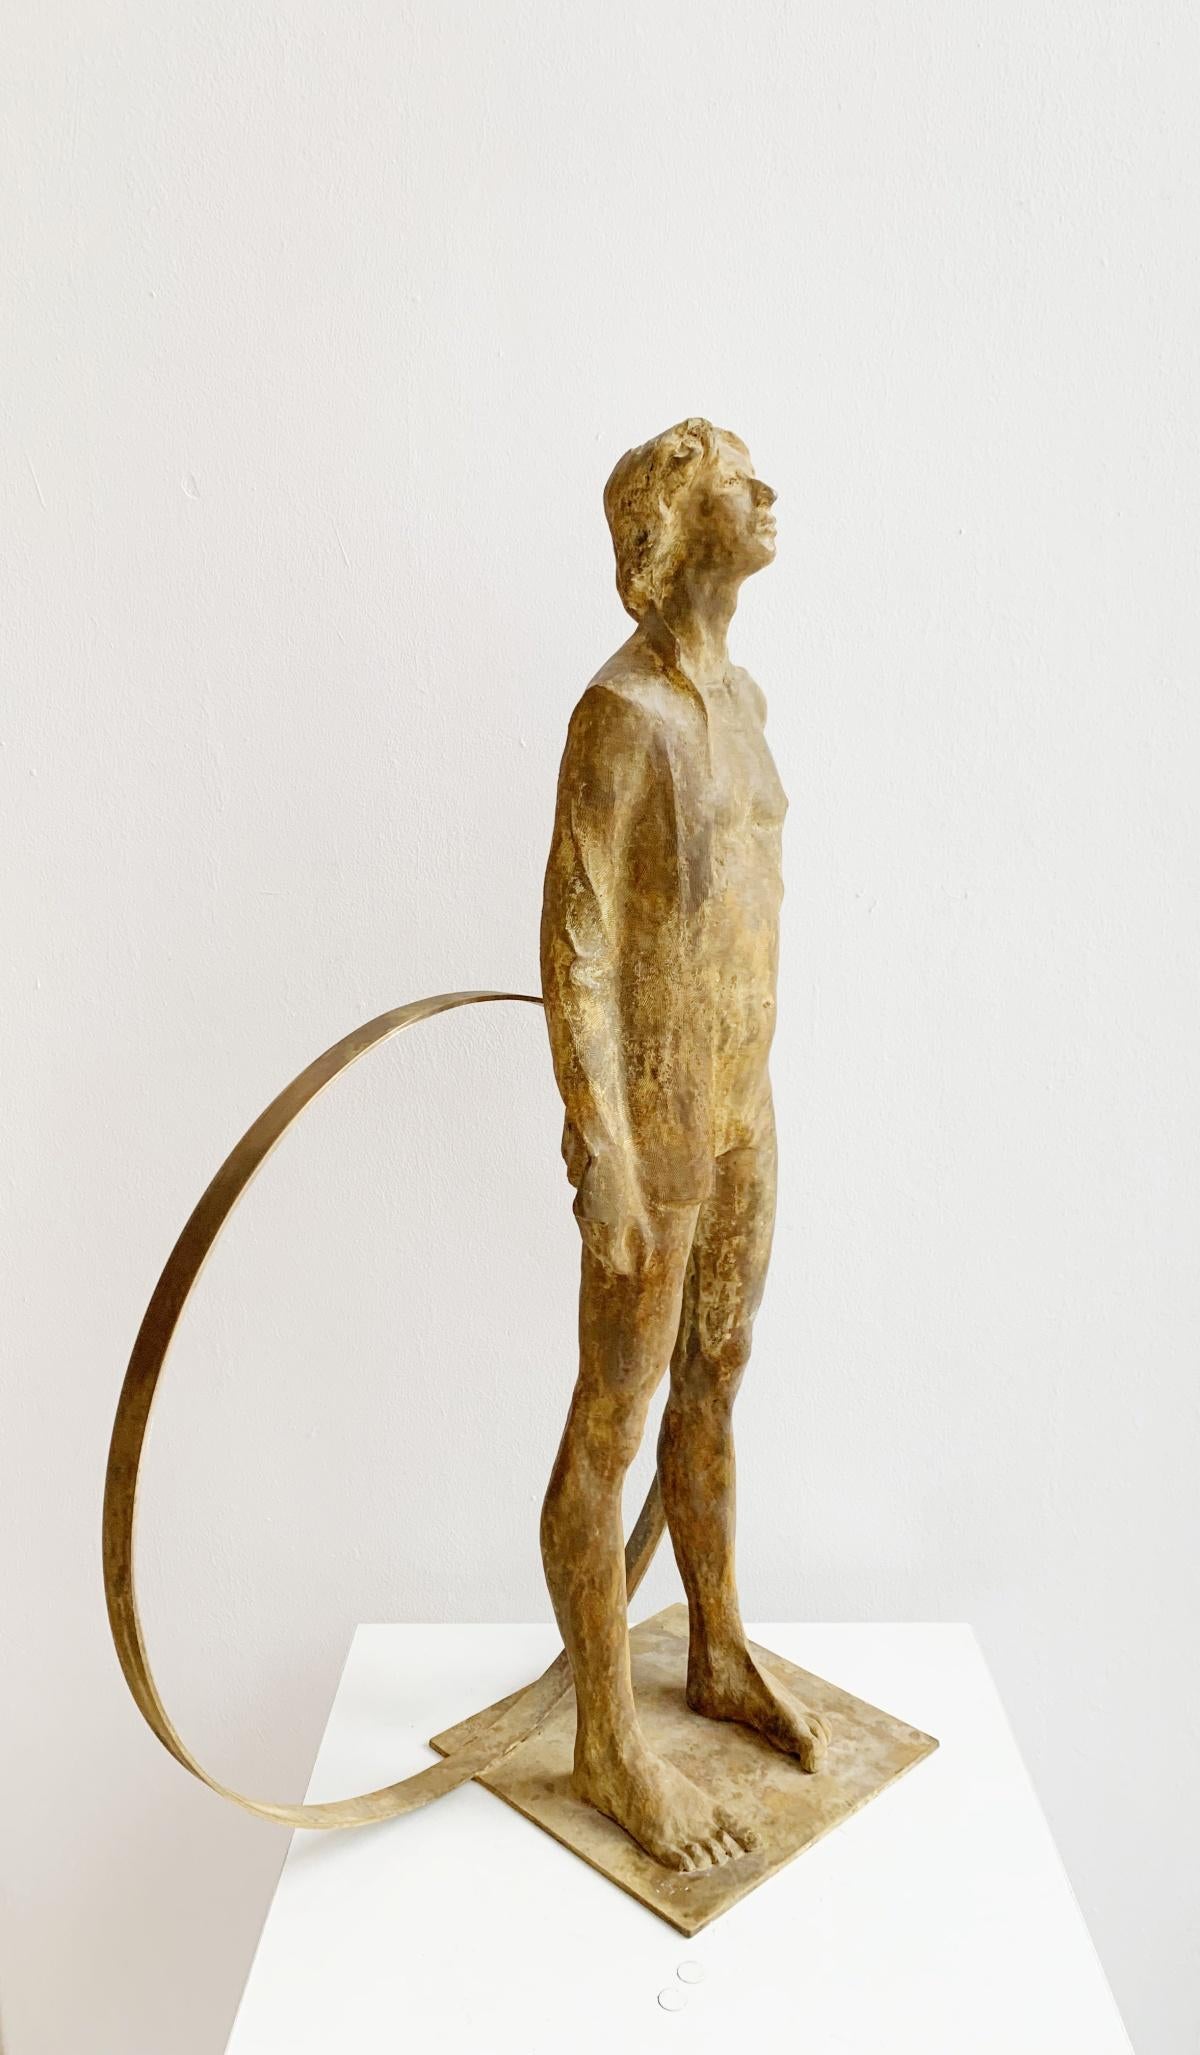 Limited edition bronze sculpture by Polish artist Olga Prokop-Misniakiewicz. Artist signes her artworks by hand, using engraving tool. Edition of 8. Olga Prokop-Misniakiewicz likes to experiment with art matter in her creations so in editions the